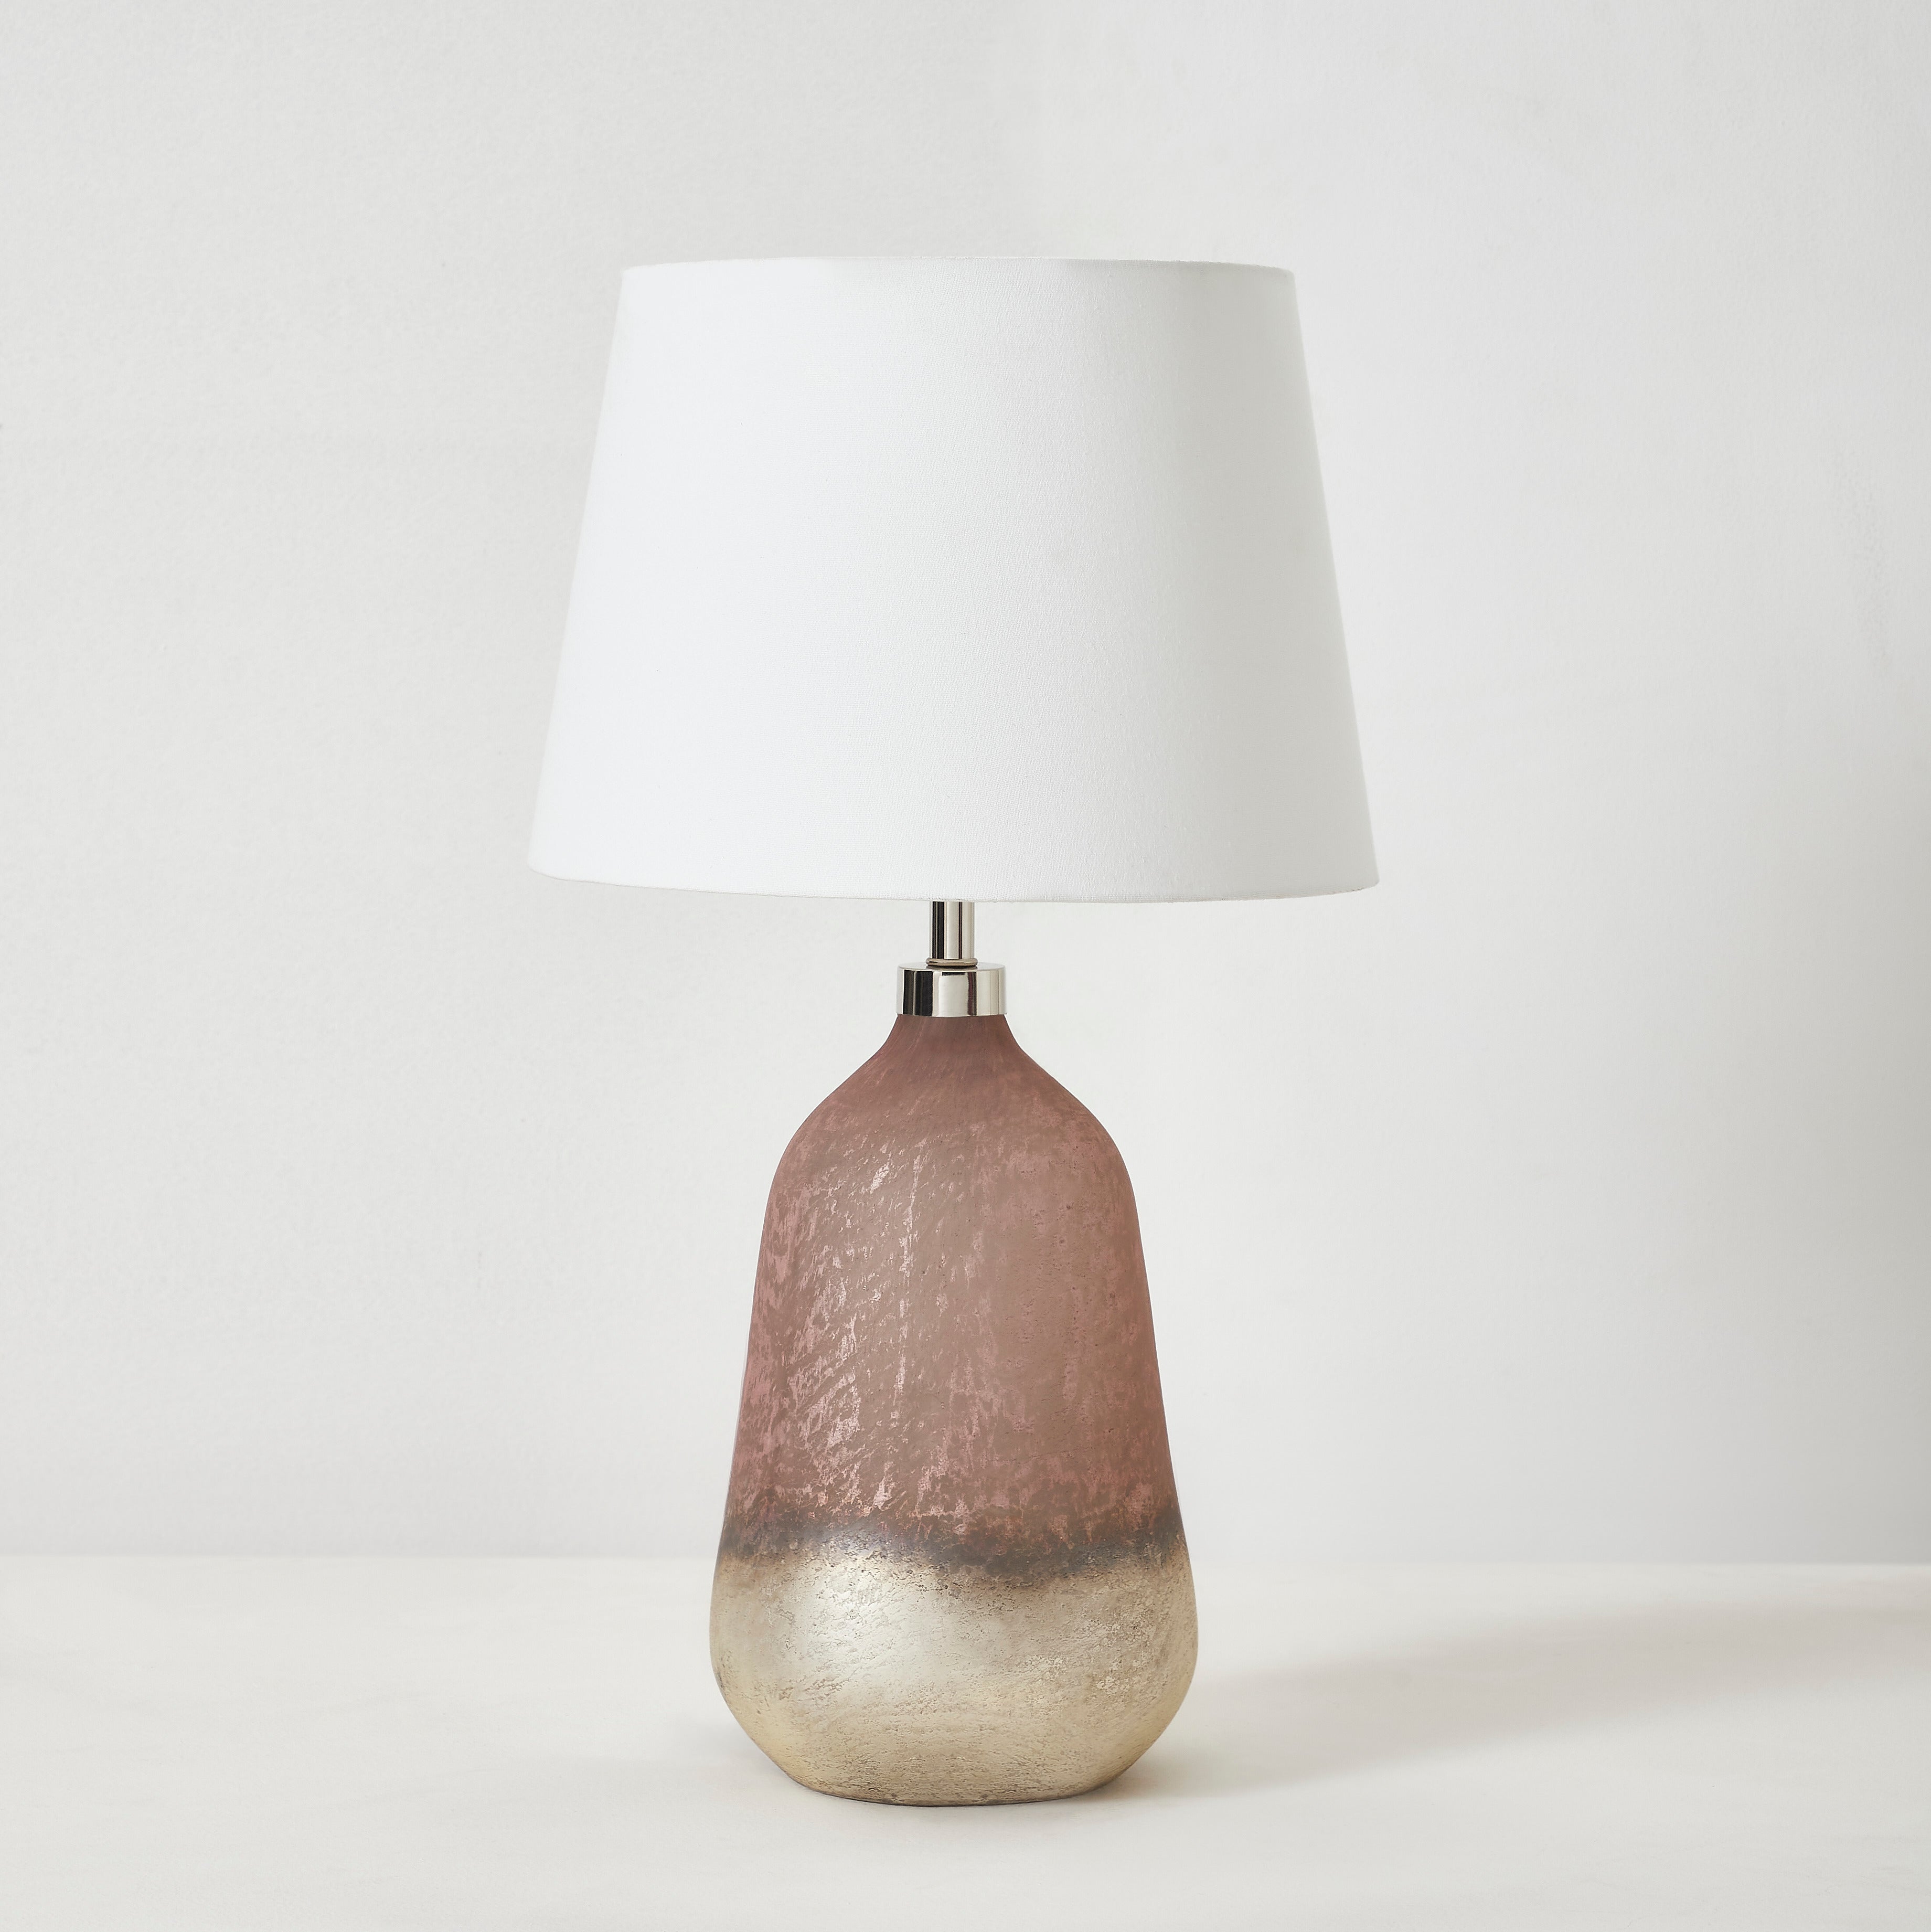 Walze Light Table Lamp by homeblitz.in